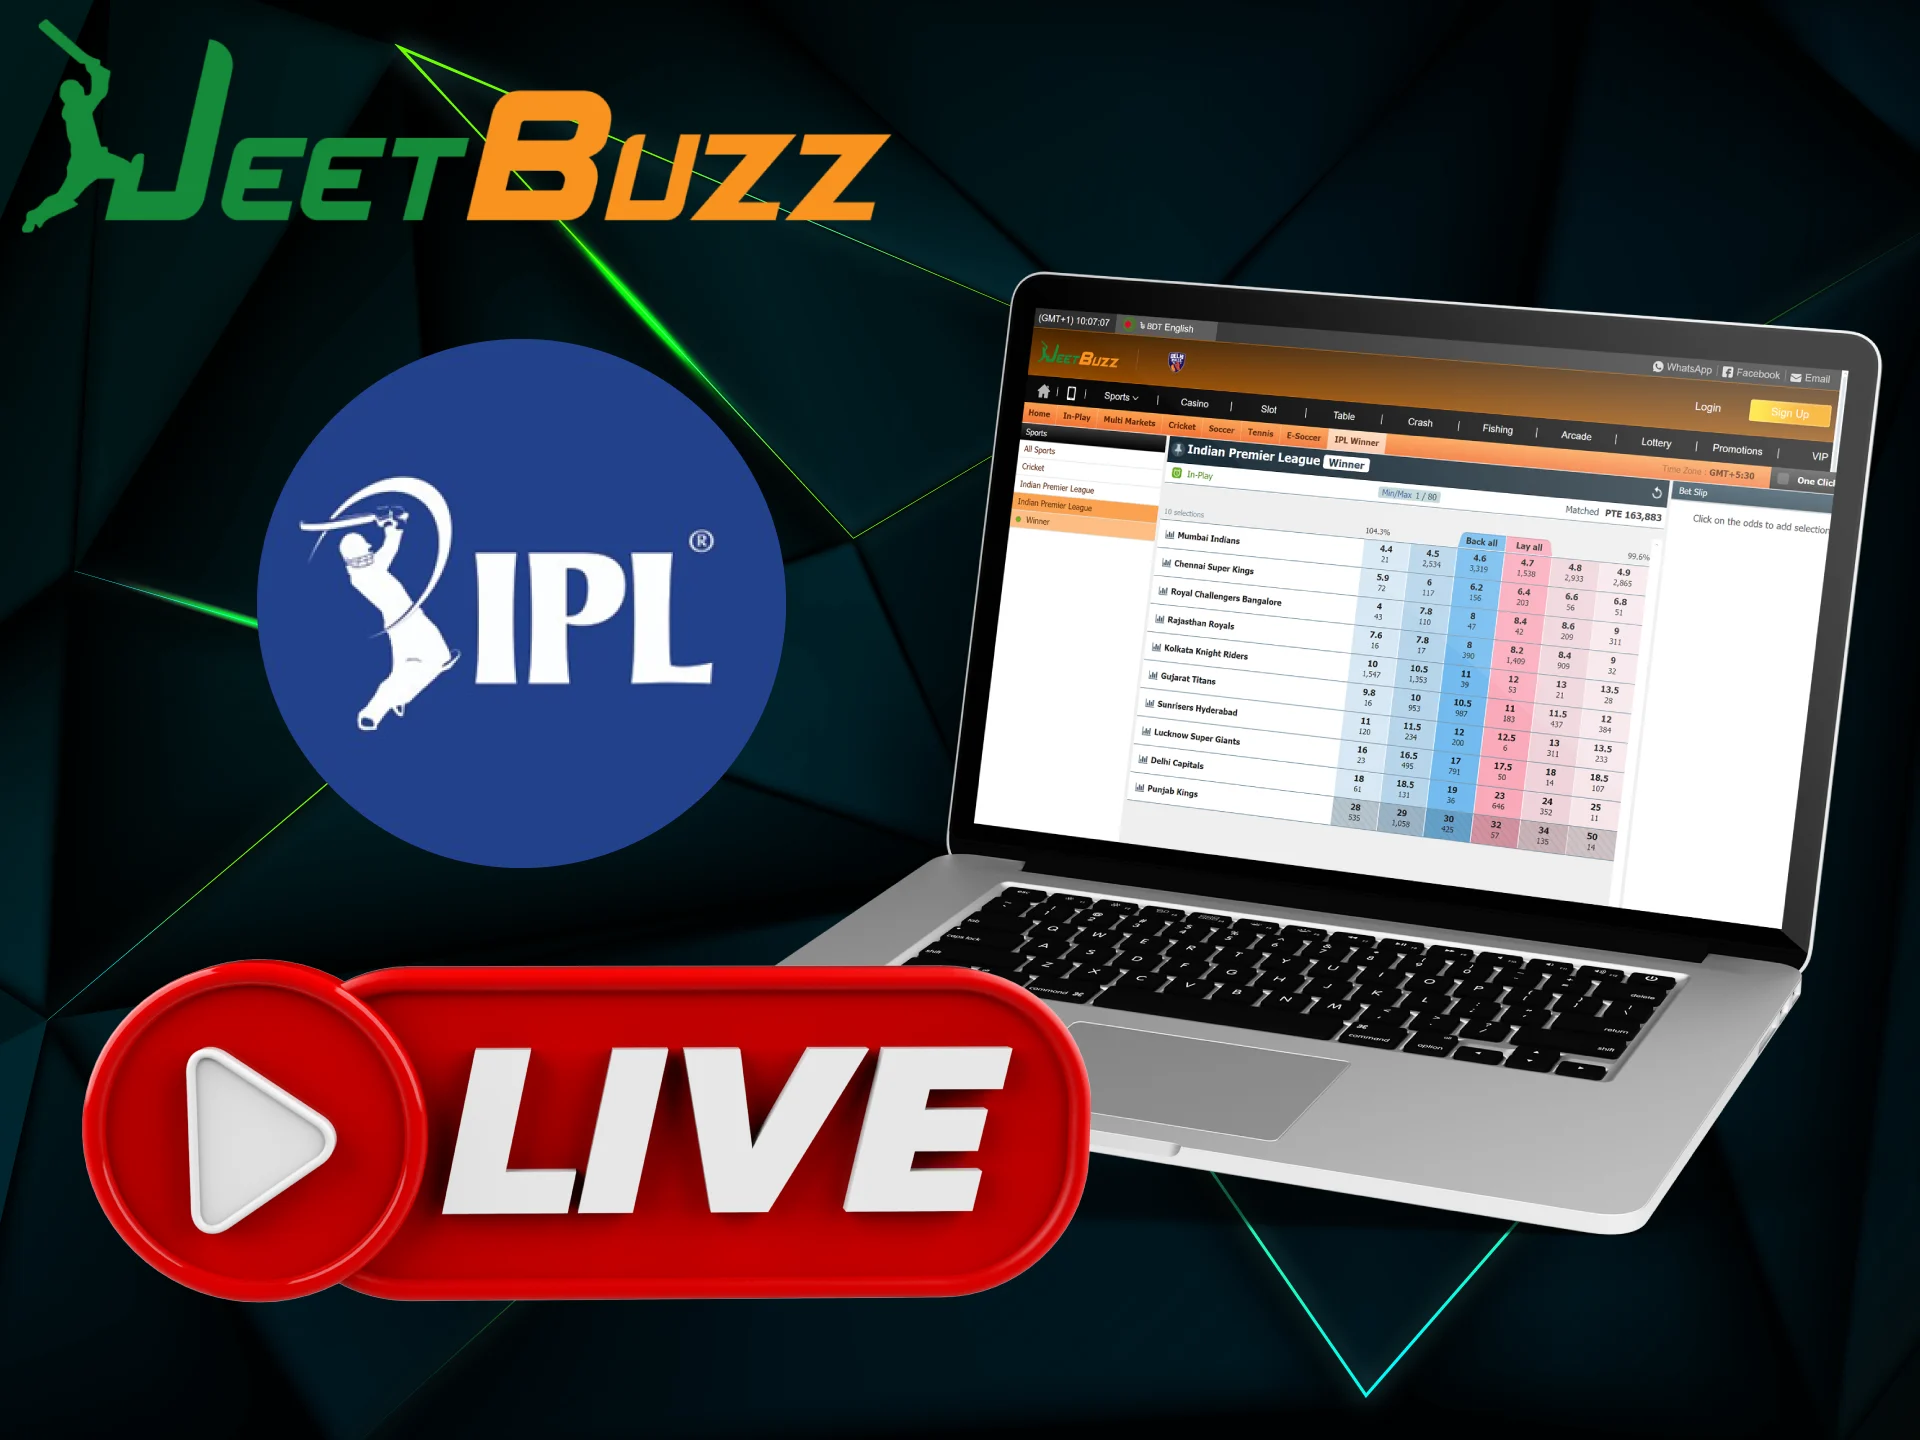 JeetBuzz offers live betting on cricket and other sports disciplines.